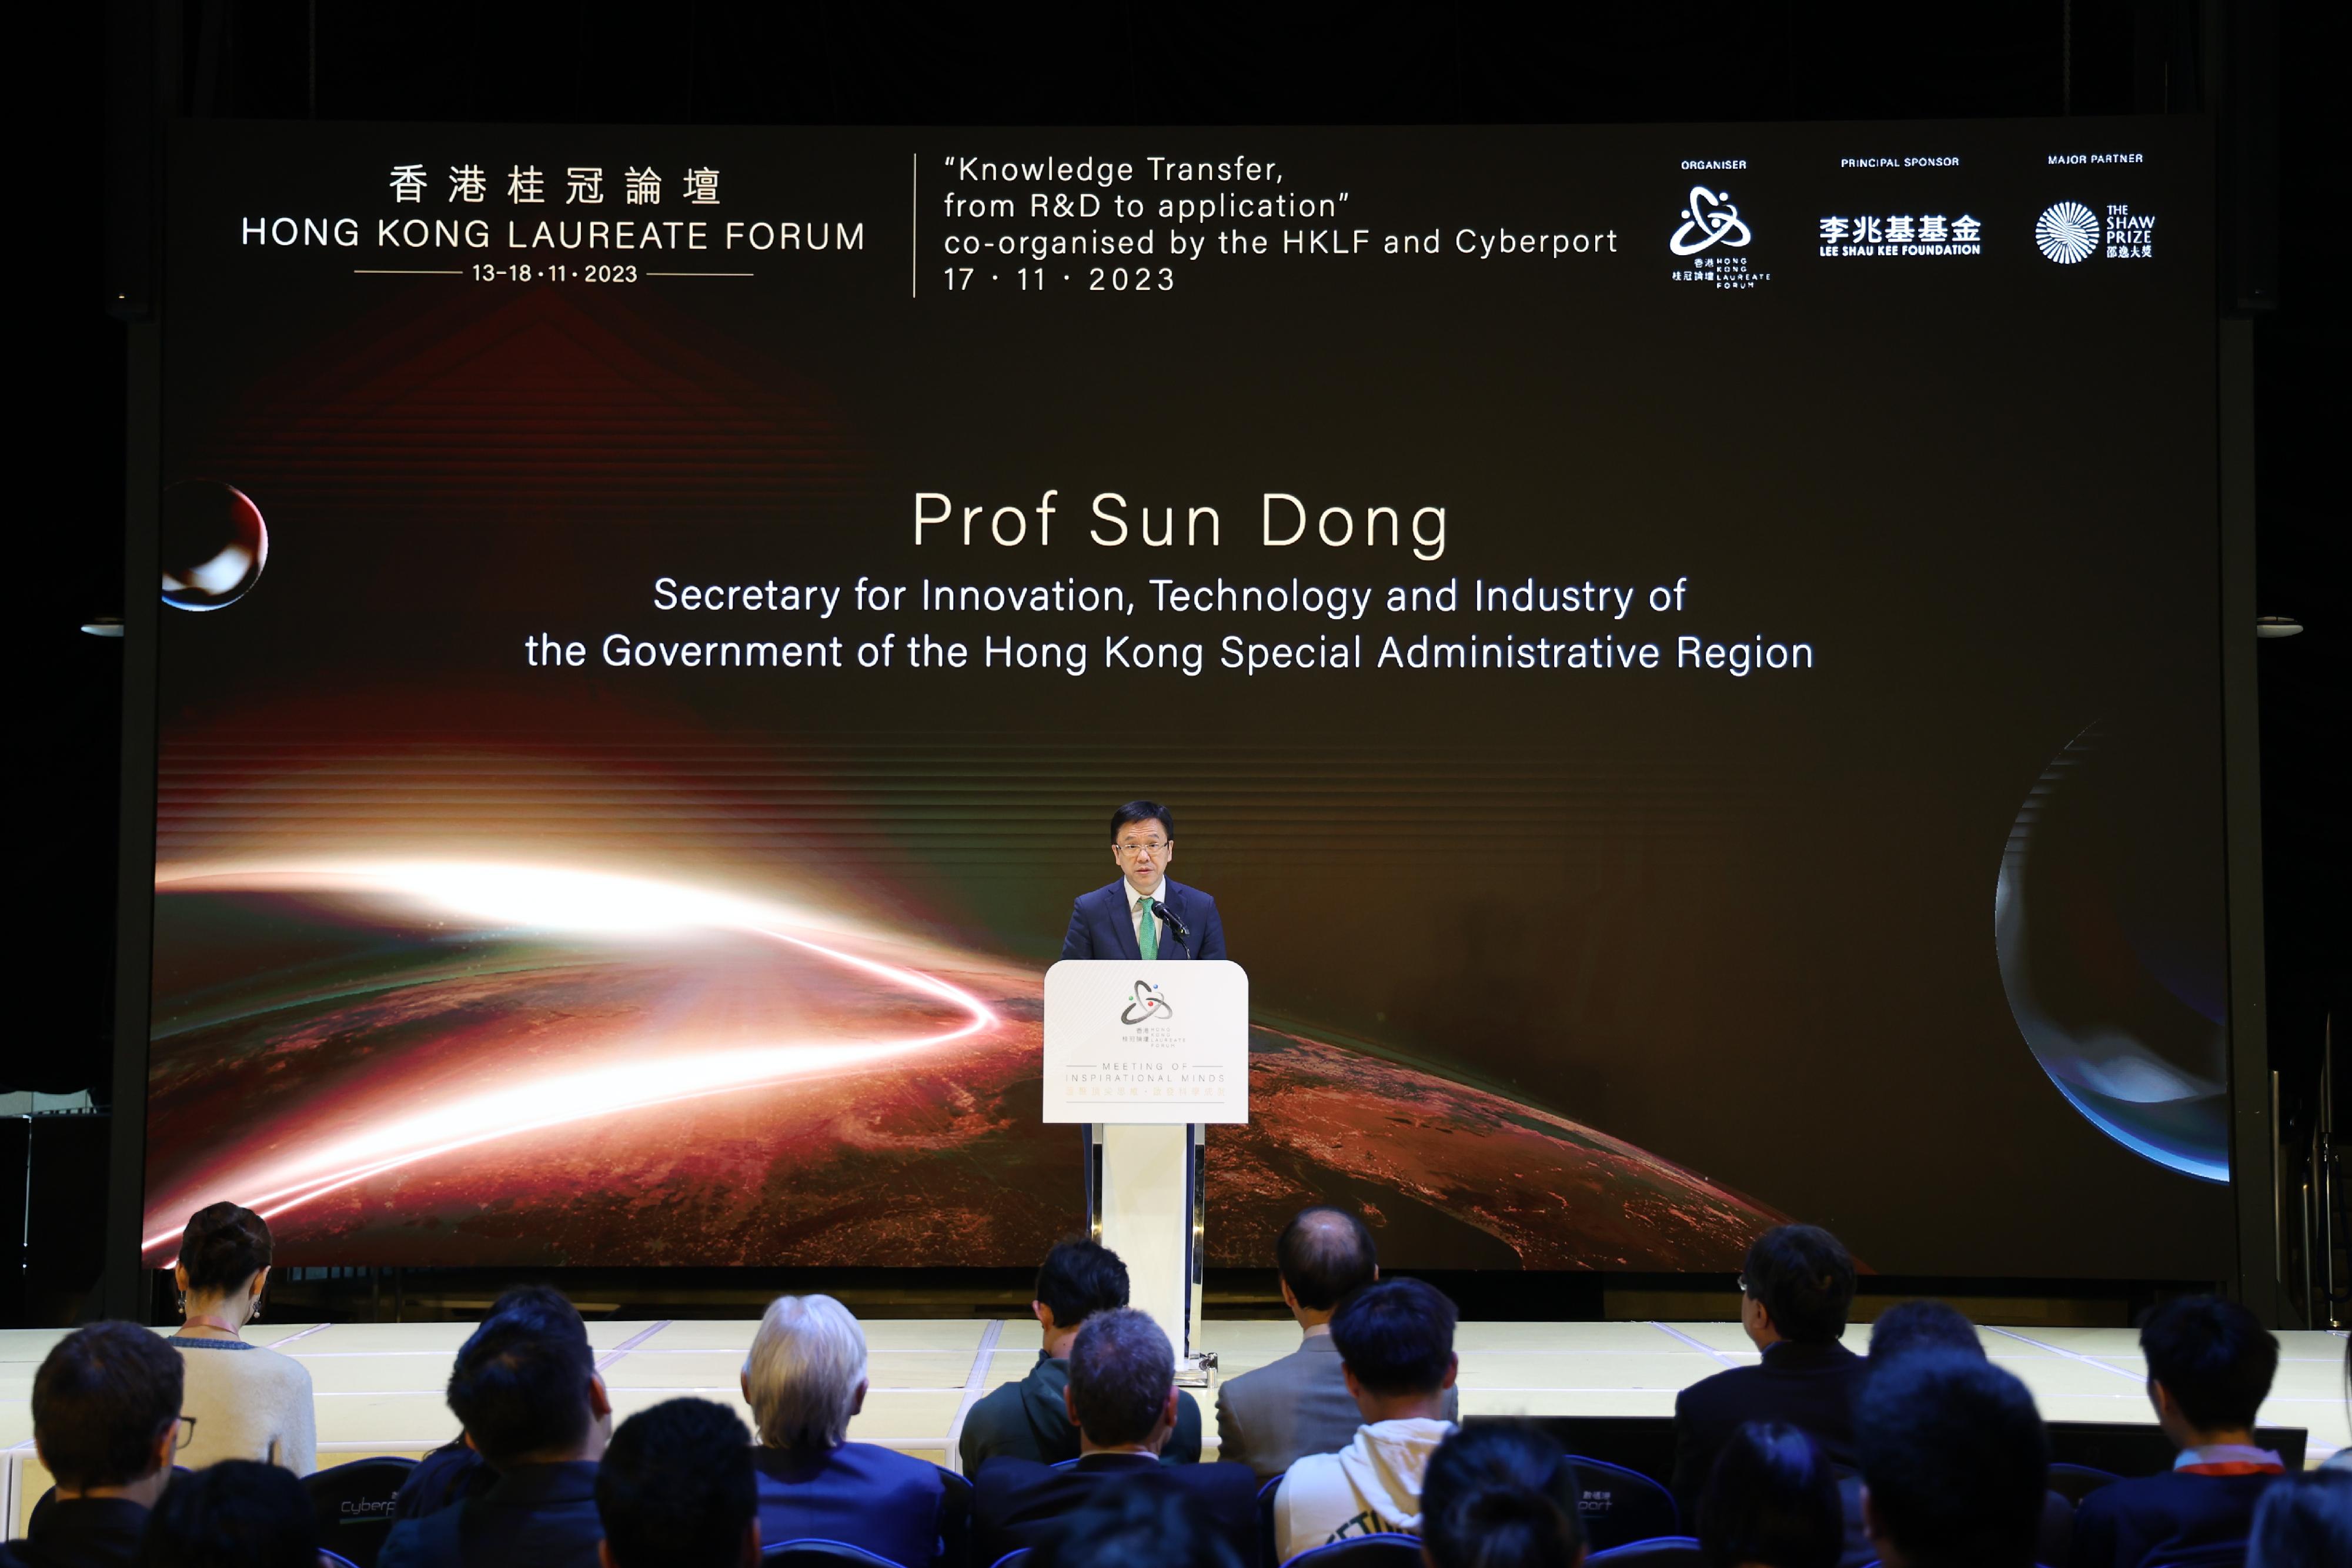 The Secretary for Innovation, Technology and Industry, Professor Sun Dong, speaks at the Hong Kong Laureate Forum 2023 Co-organised Programme with Cyberport: Knowledge Transfer, from R&D to application today (November 17).